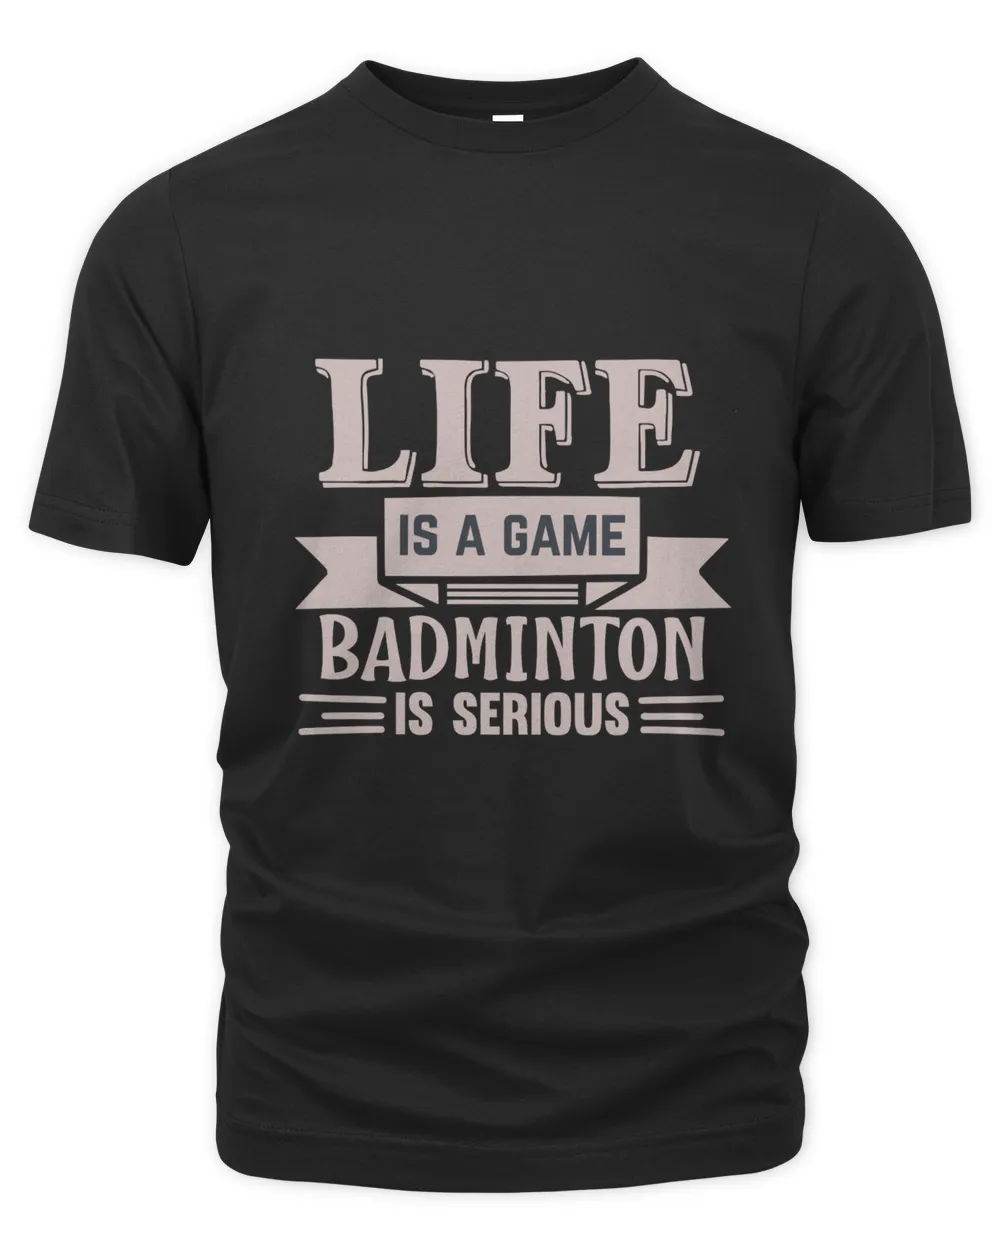 LIFE Is A Game BADMINTON Is Serious Shirt, Badminton Shirt,Badminton T-shirt,Funny Badminton Shirt, Badminton Gift,Sport Shirt